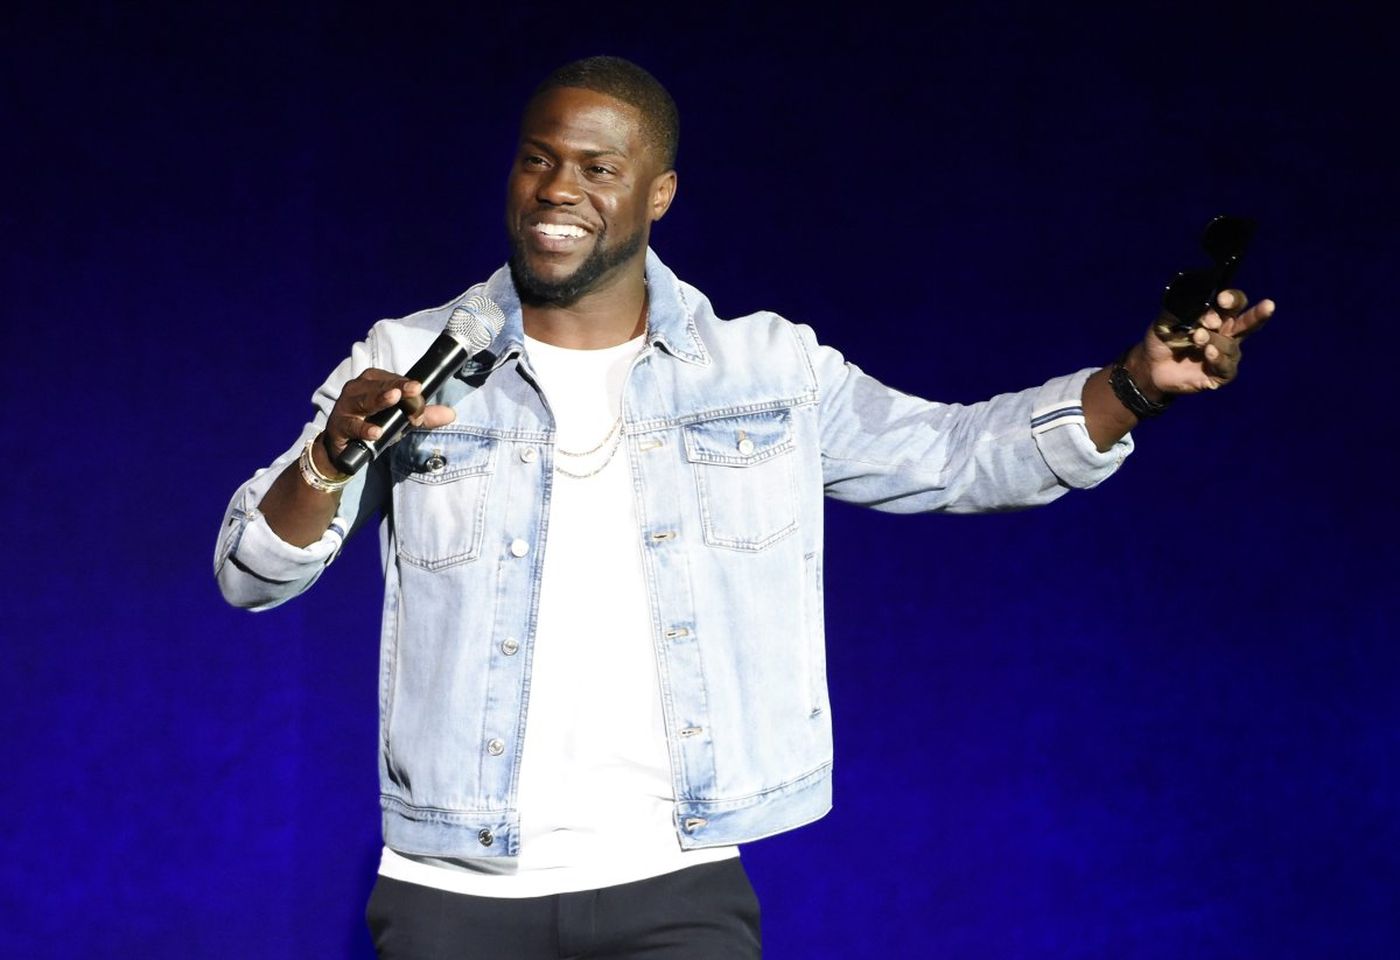 What % Funny Are You? Kevin Hart